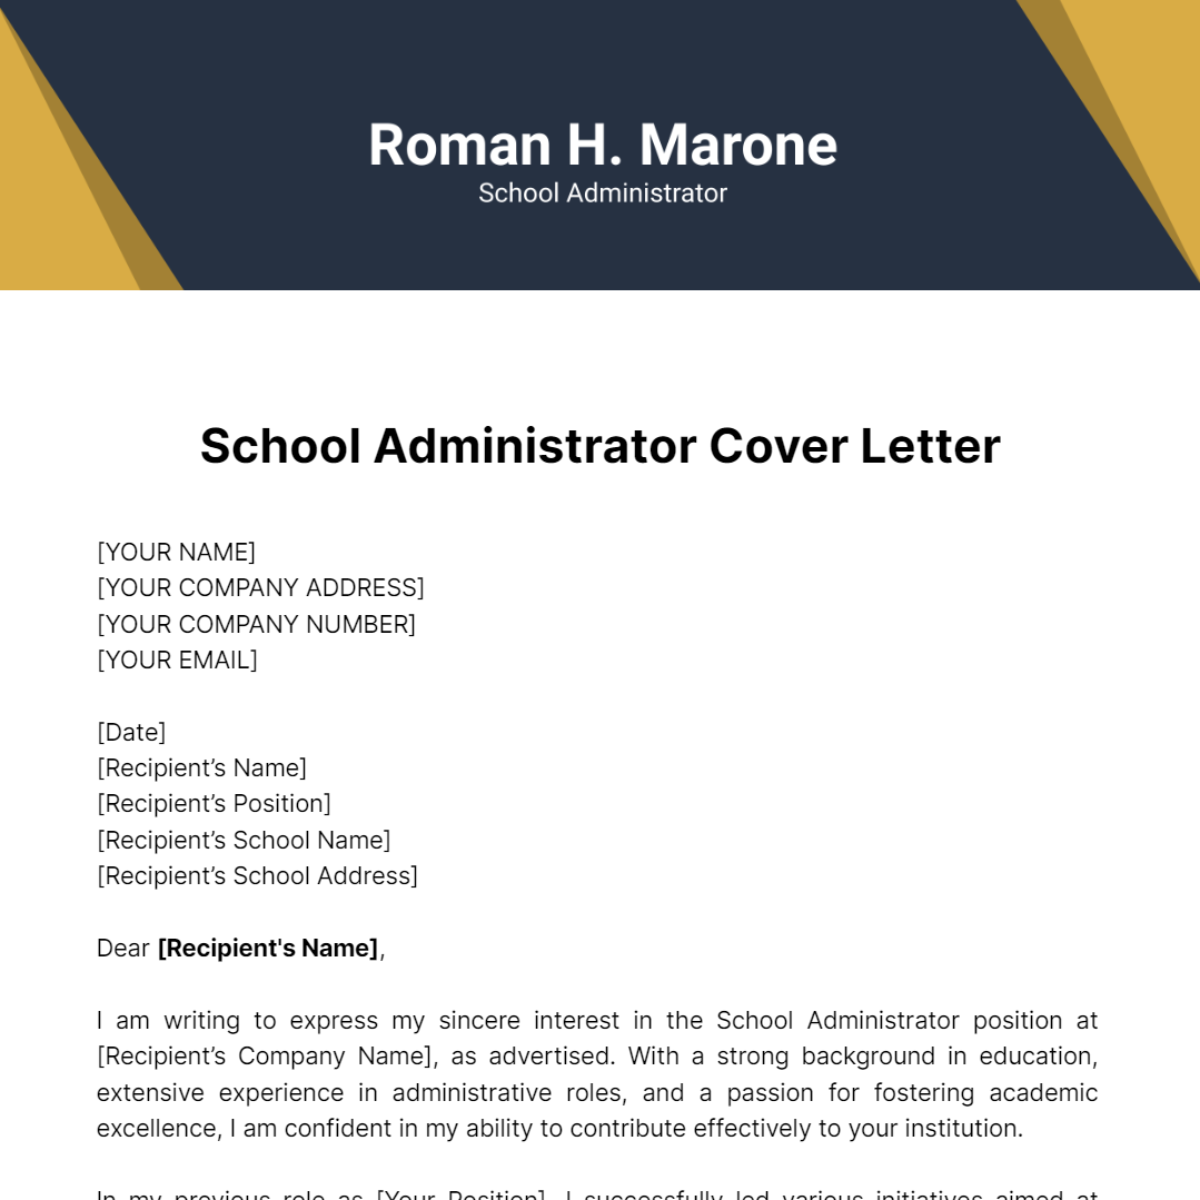 School Administrator Cover Letter Template